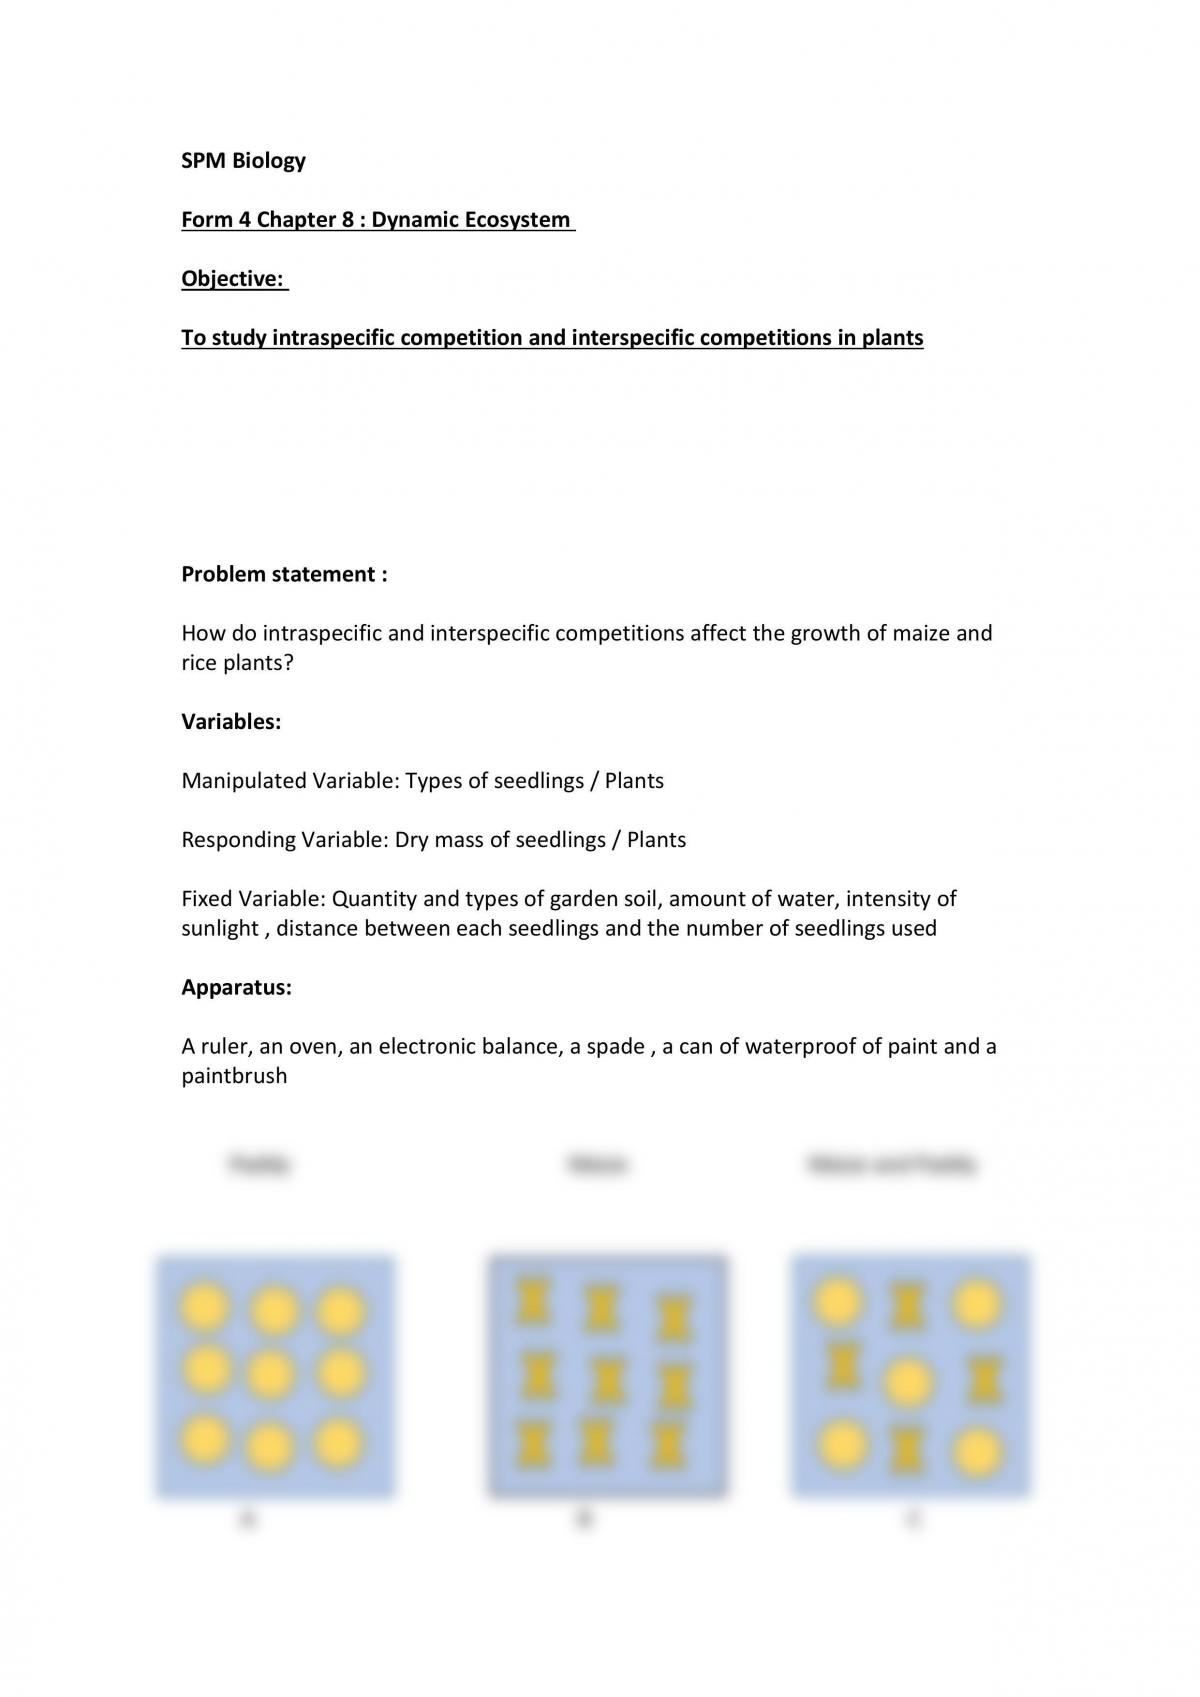 Lab Experiment Report: Competitions between plants  - Page 1